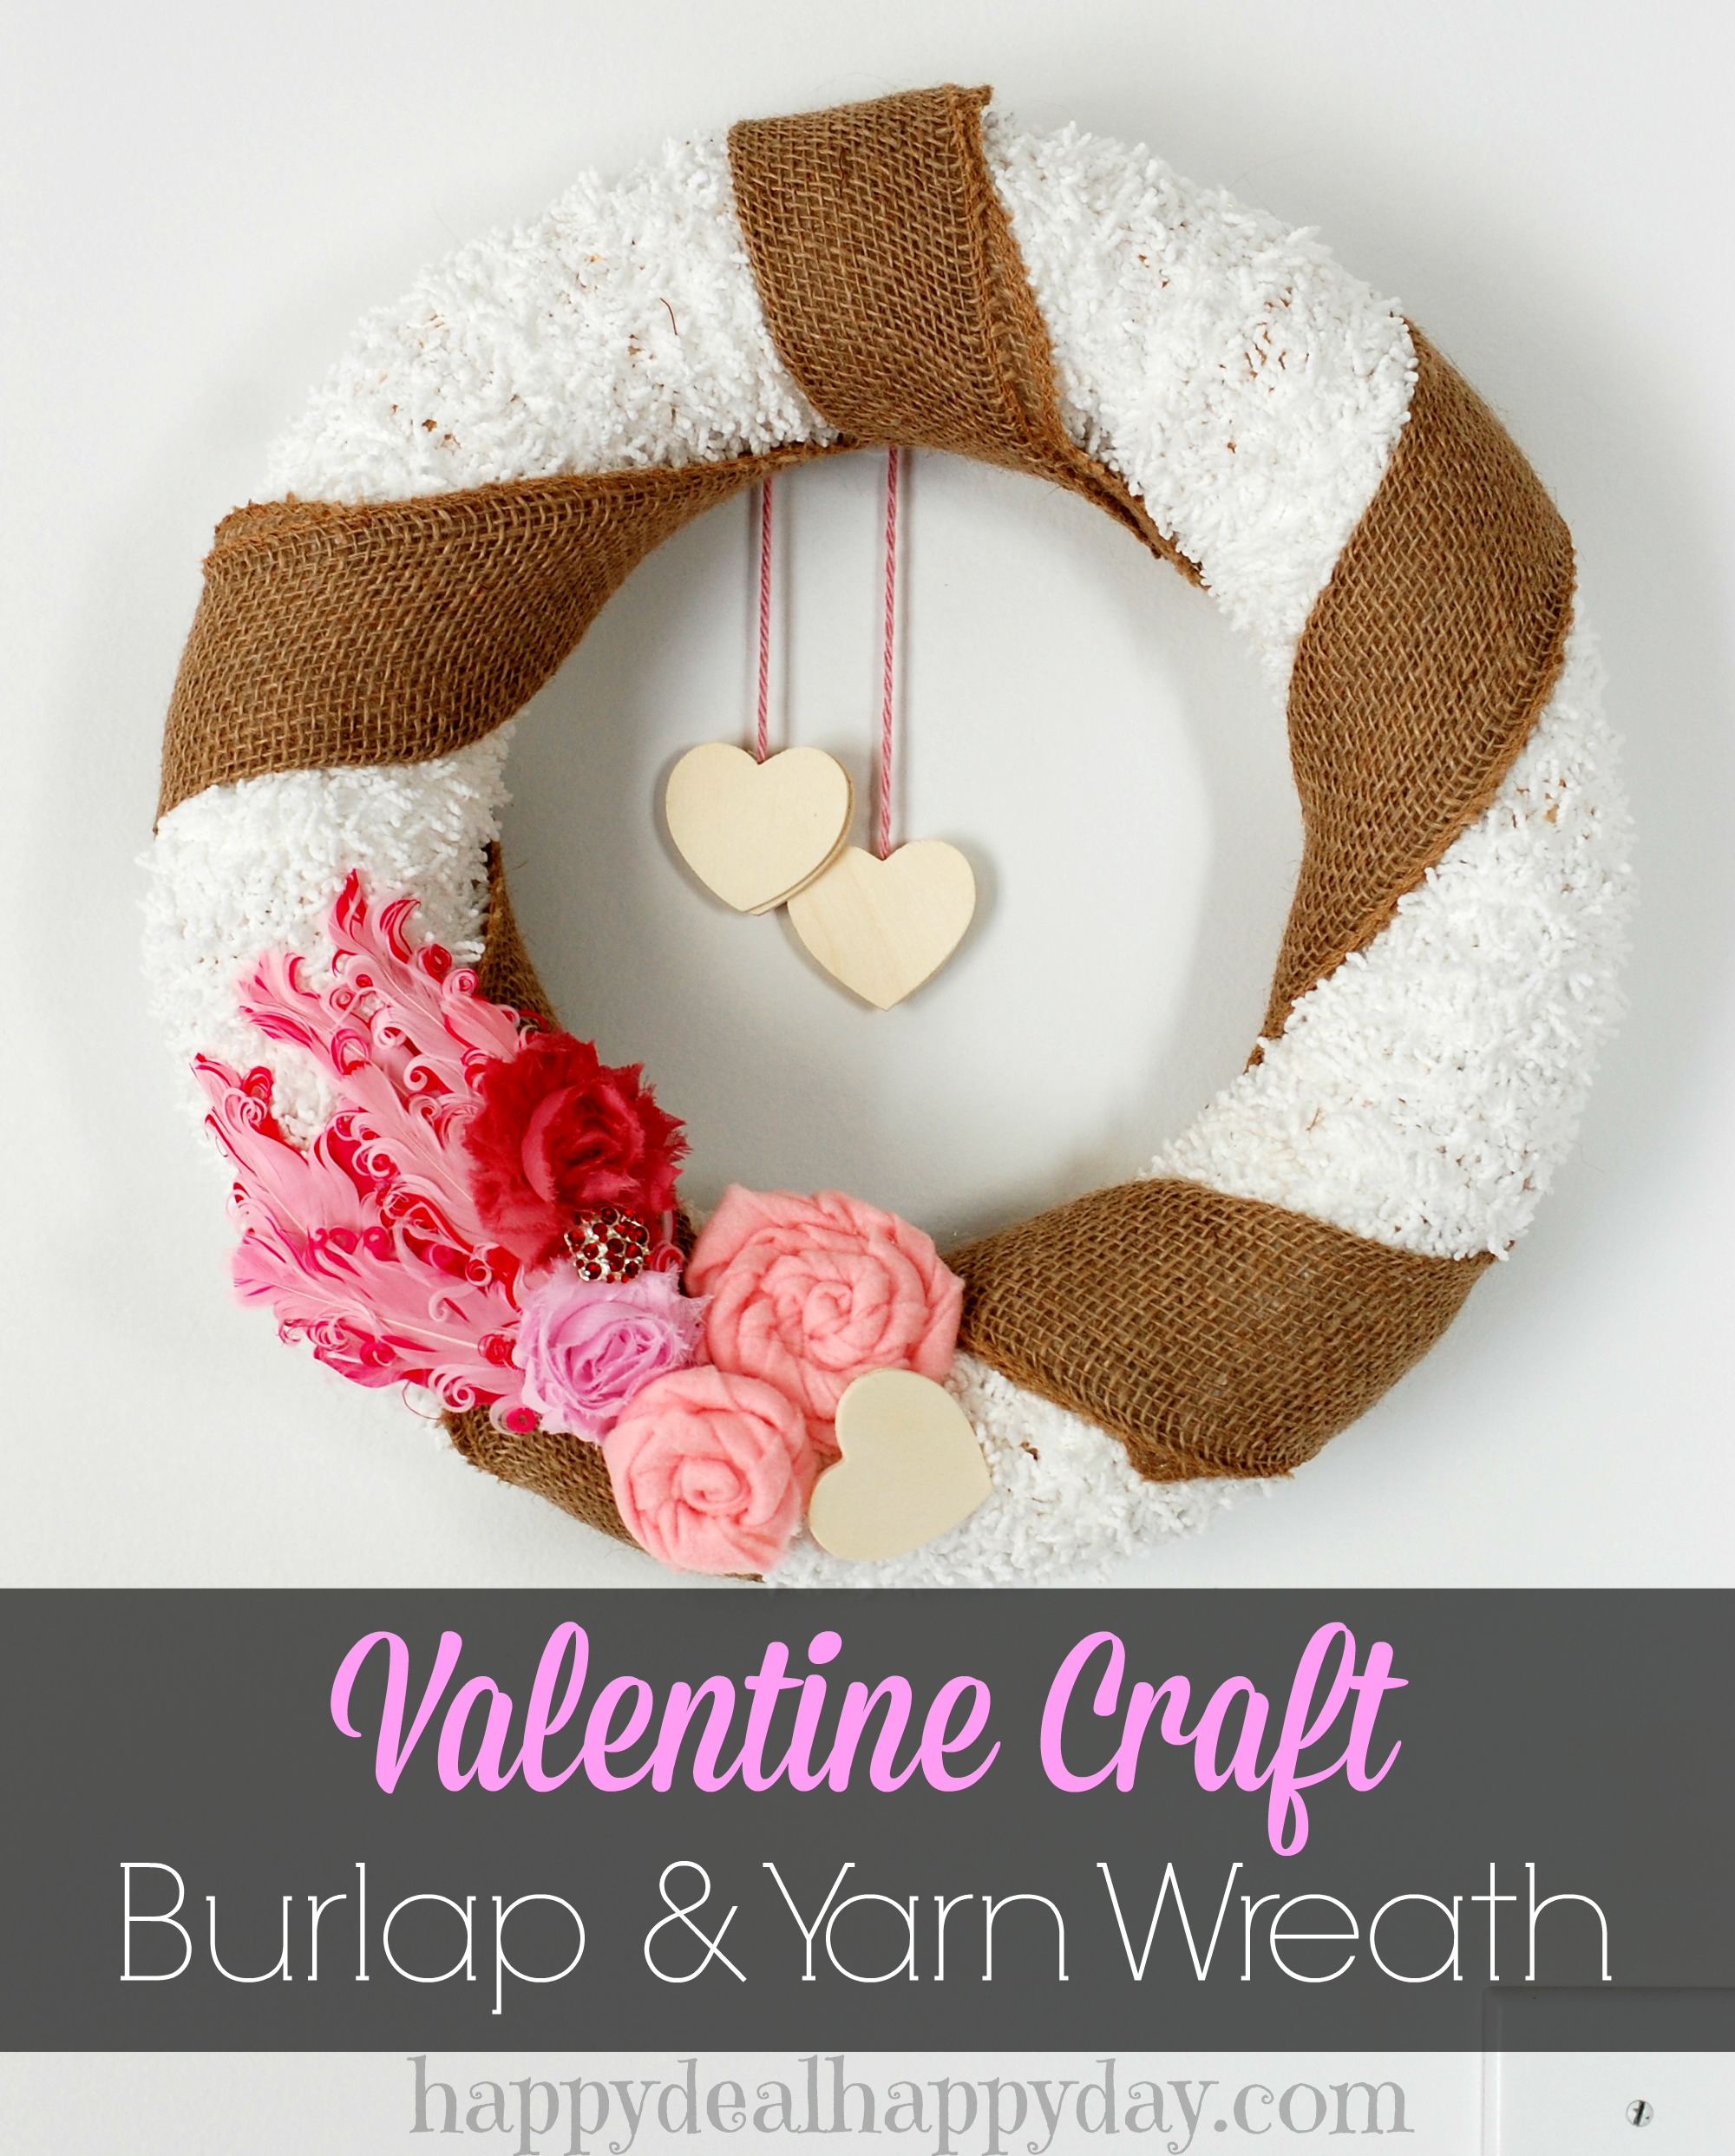 Valentine Wreath & Valentine Craft | Valentine Yarn and Burlap Wreath. So cute! I put it up right after I took down the Christmas wreath in my dining room.